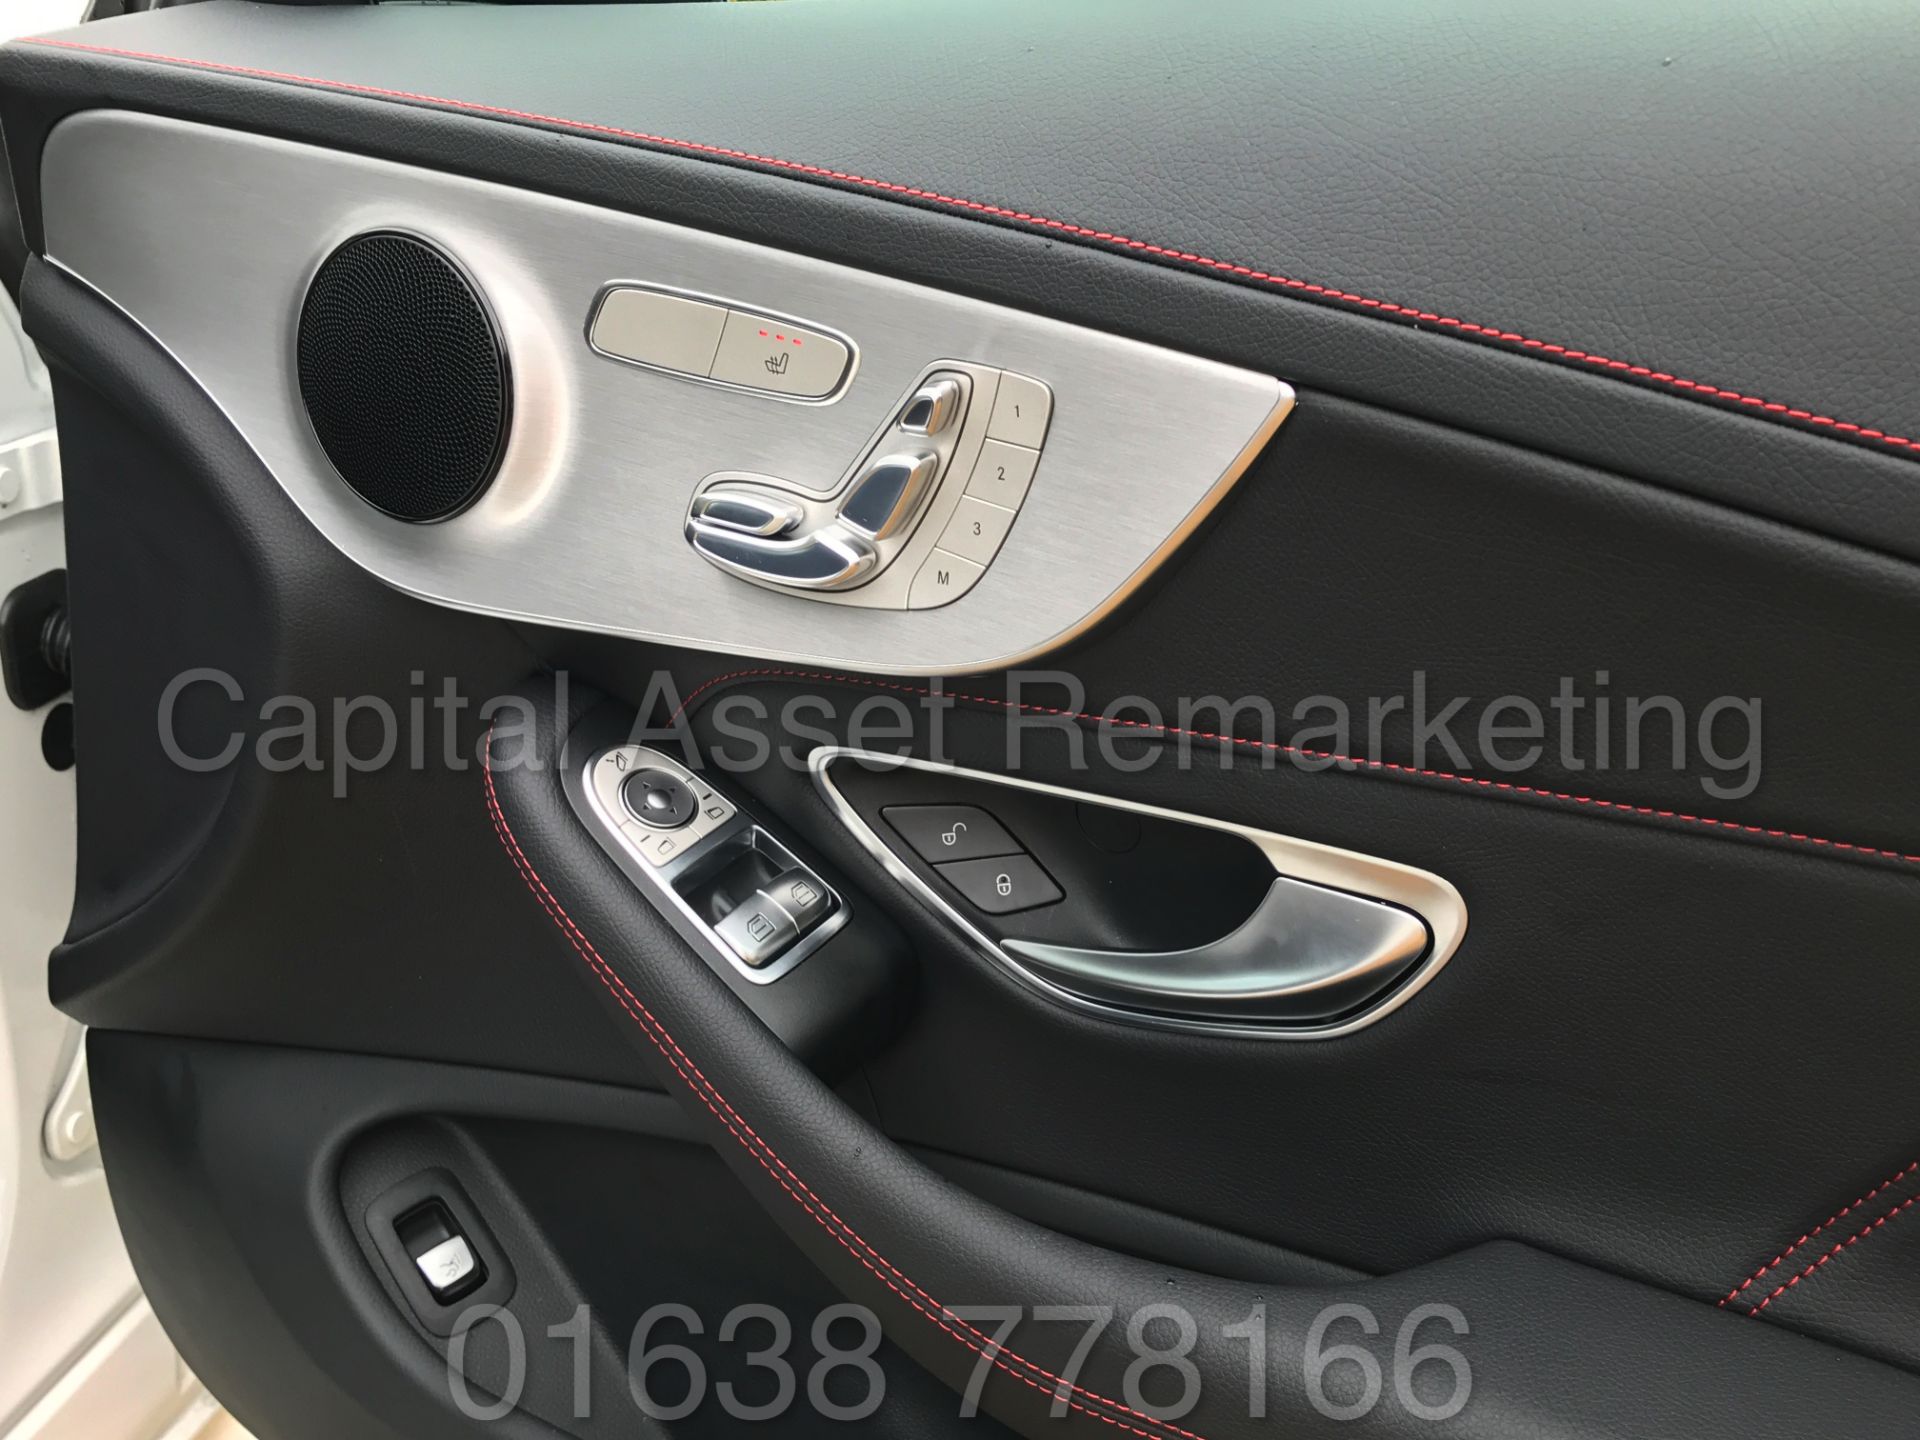 MEREDES-BENZ C43 AMG PREMIUM '4 MATIC' COUPE (2017) '9-G AUTO - LEATHER - SAT NAV' **FULLY LOADED** - Image 46 of 57